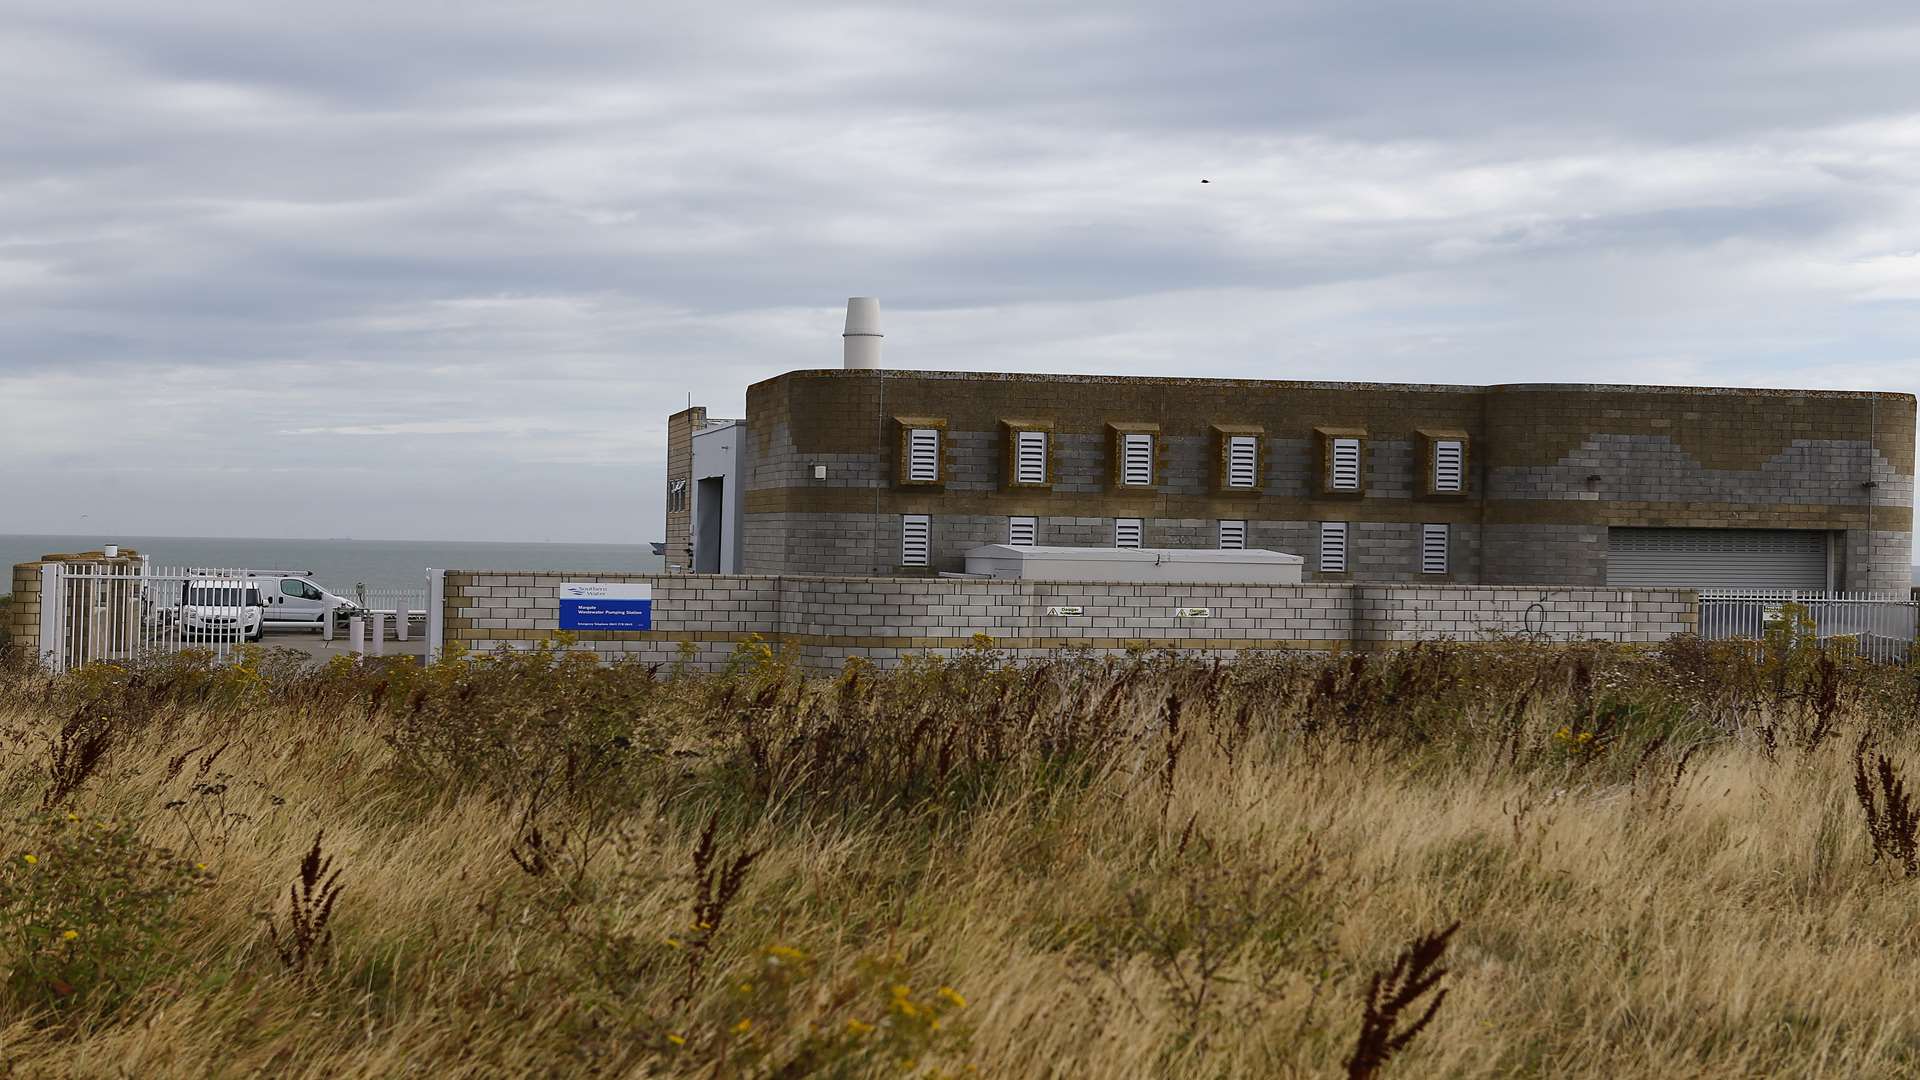 Margate waste water pumping station